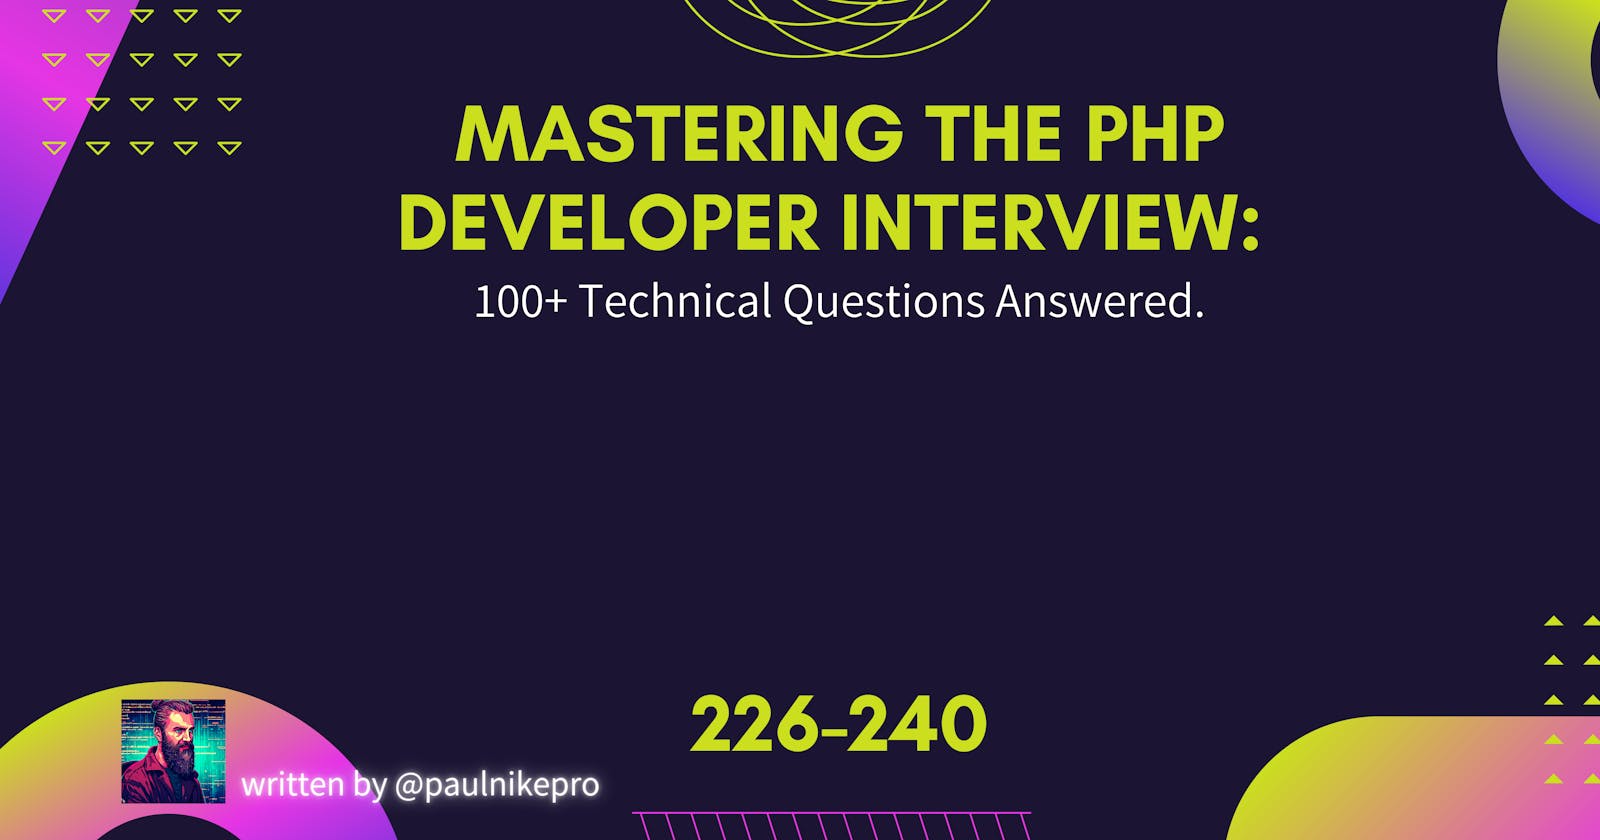 Mastering the PHP Developer Interview: 100+ Technical Questions Answered. 226-240.